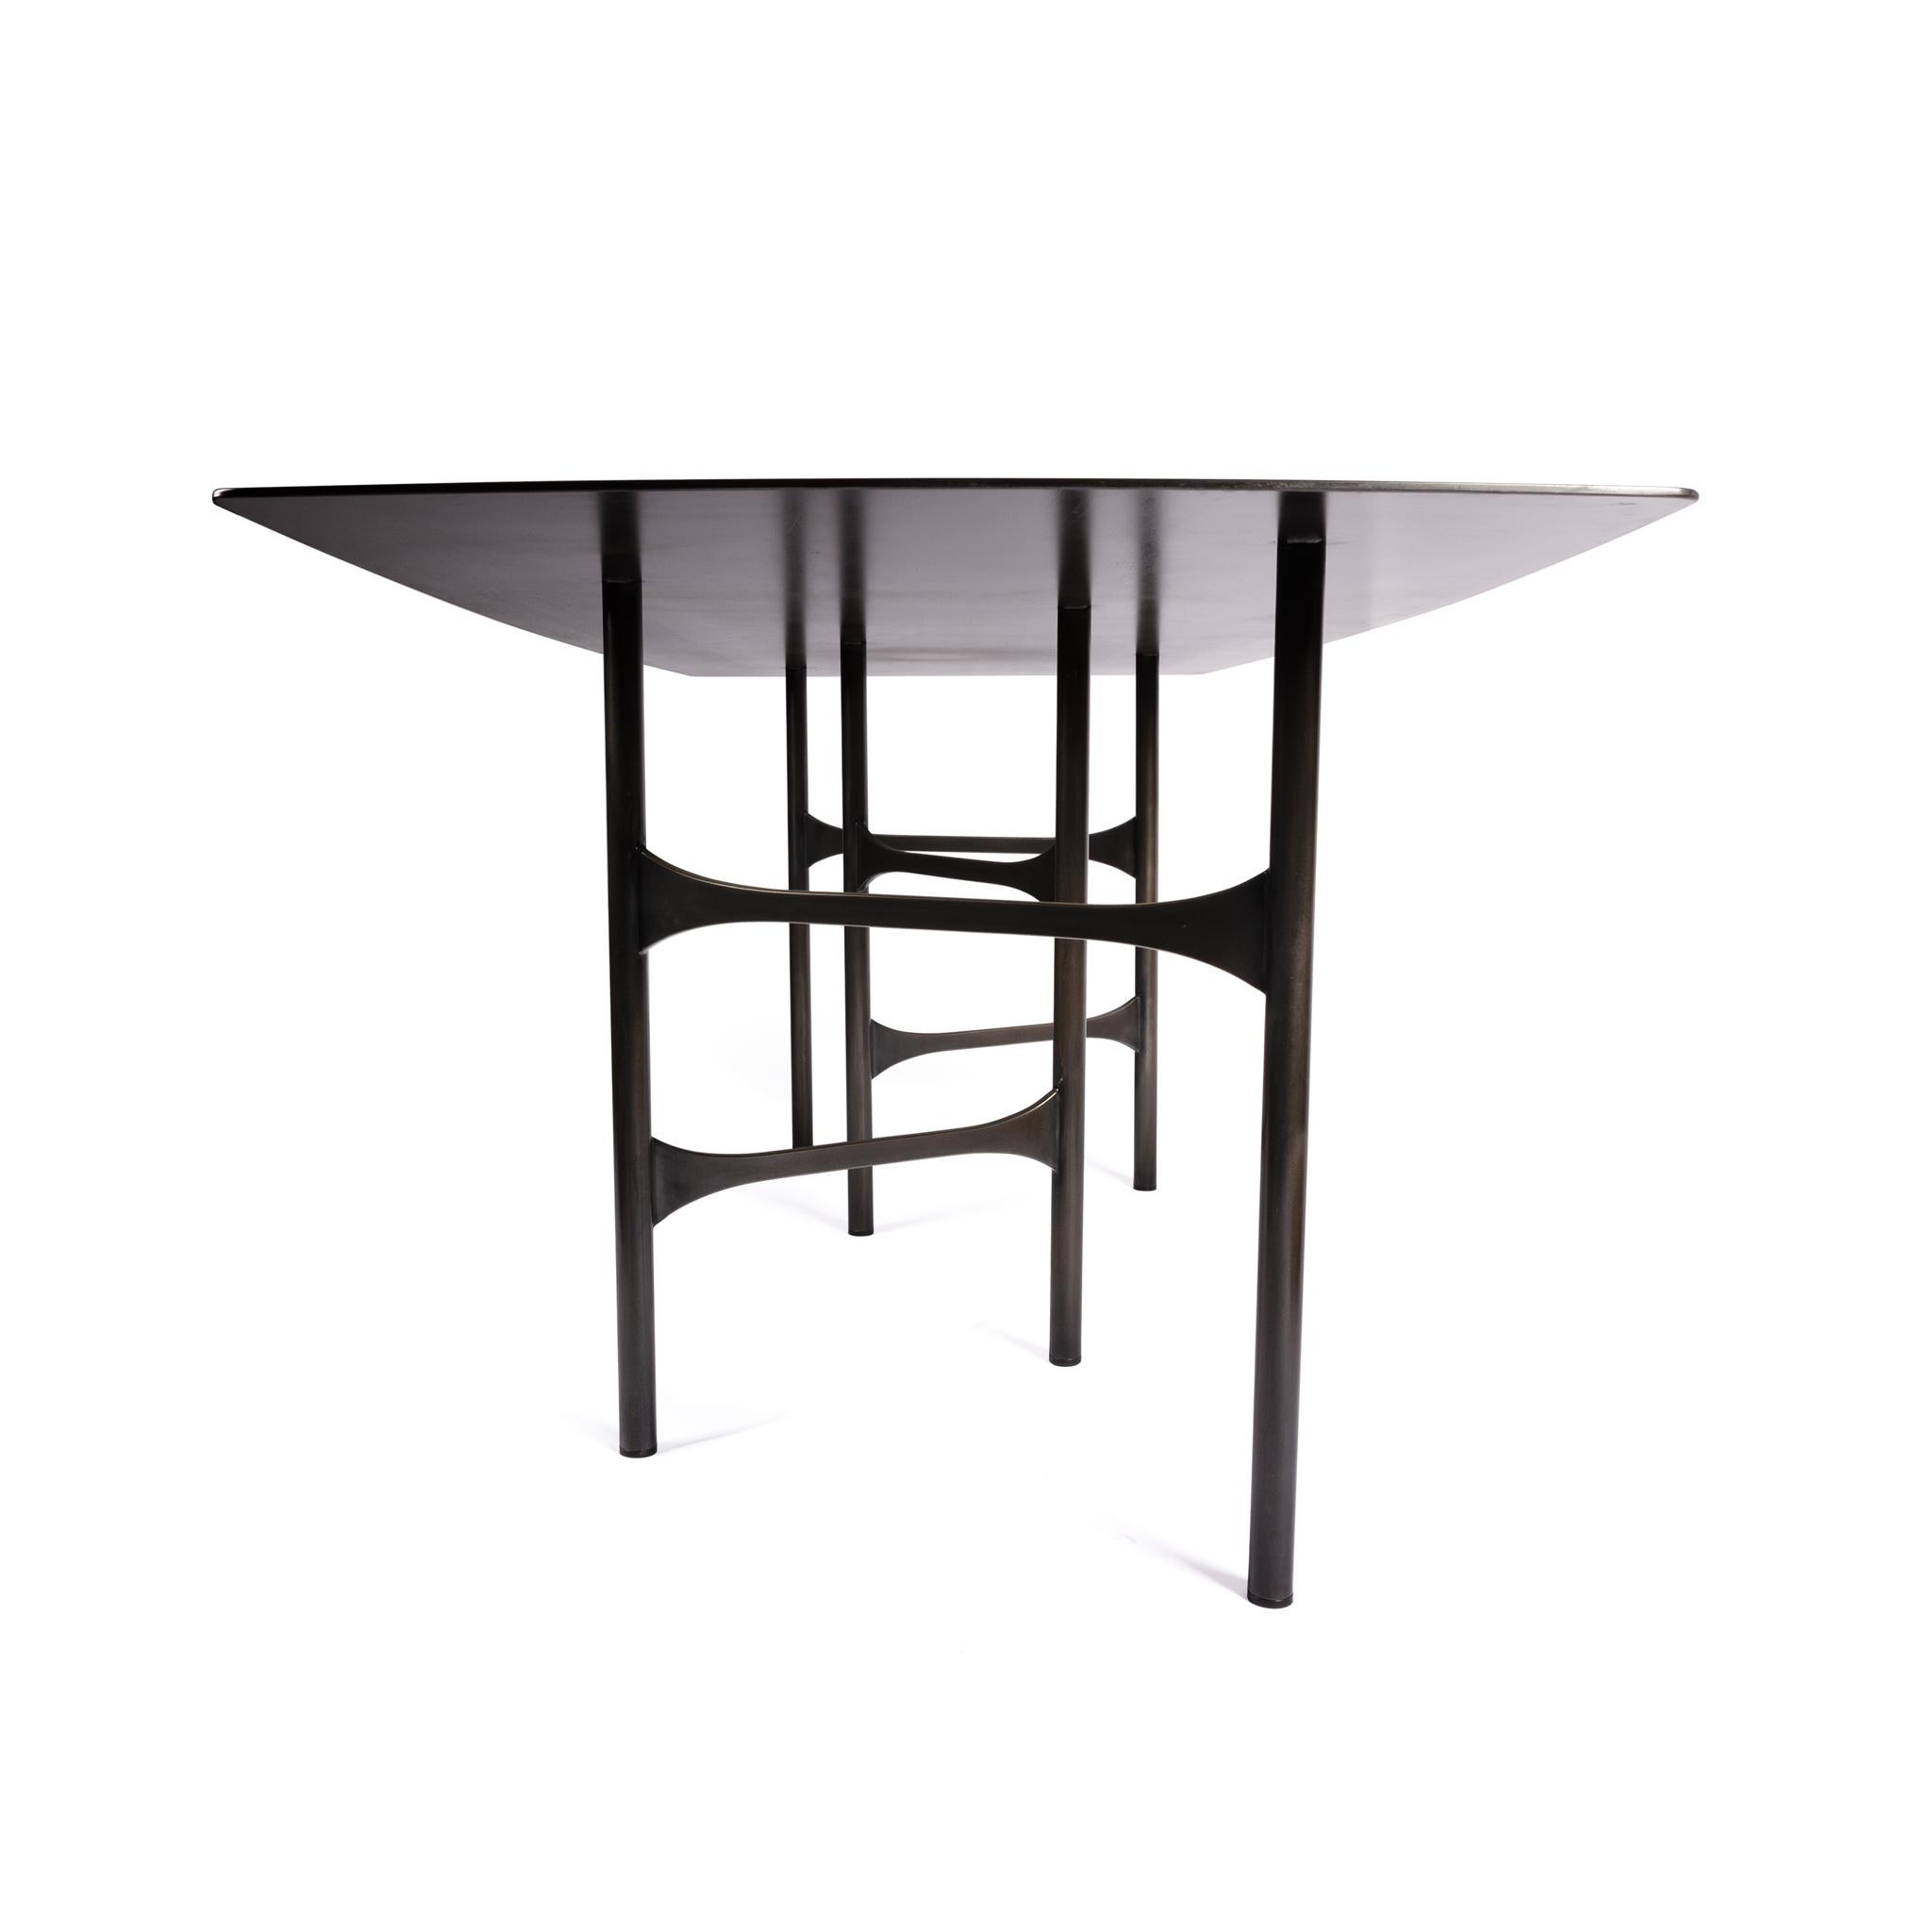 American Rectangular Smooth Metal Cross Beam Table in Linear Blackened Finish In Stock